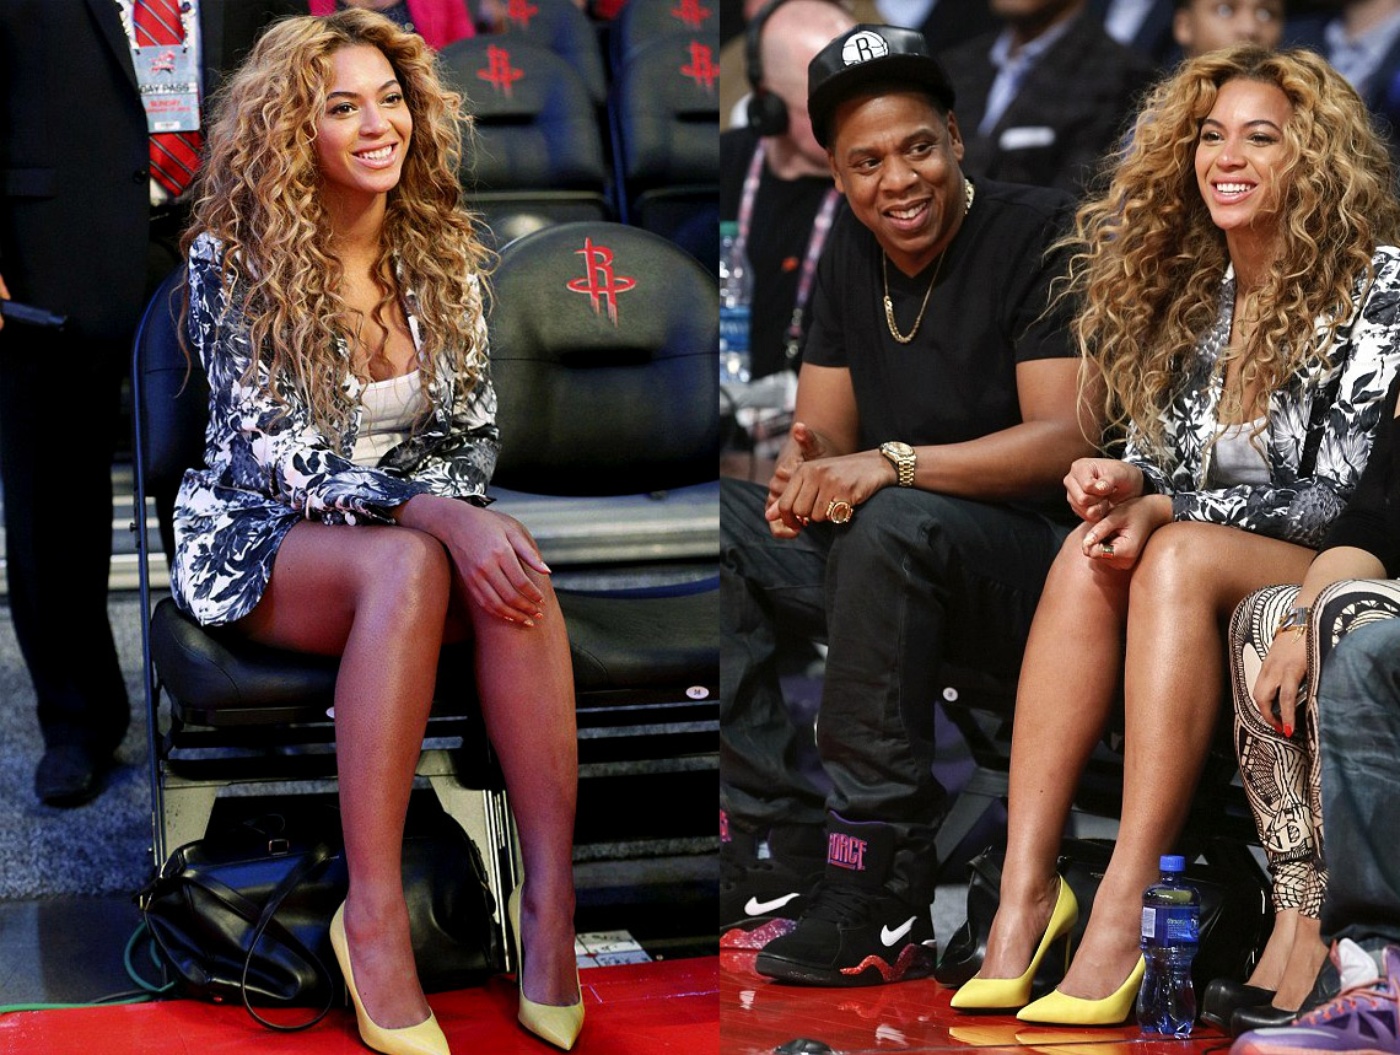 Beyonce & Jay-Z at NBA All Star Game submitted by Canary + Rook